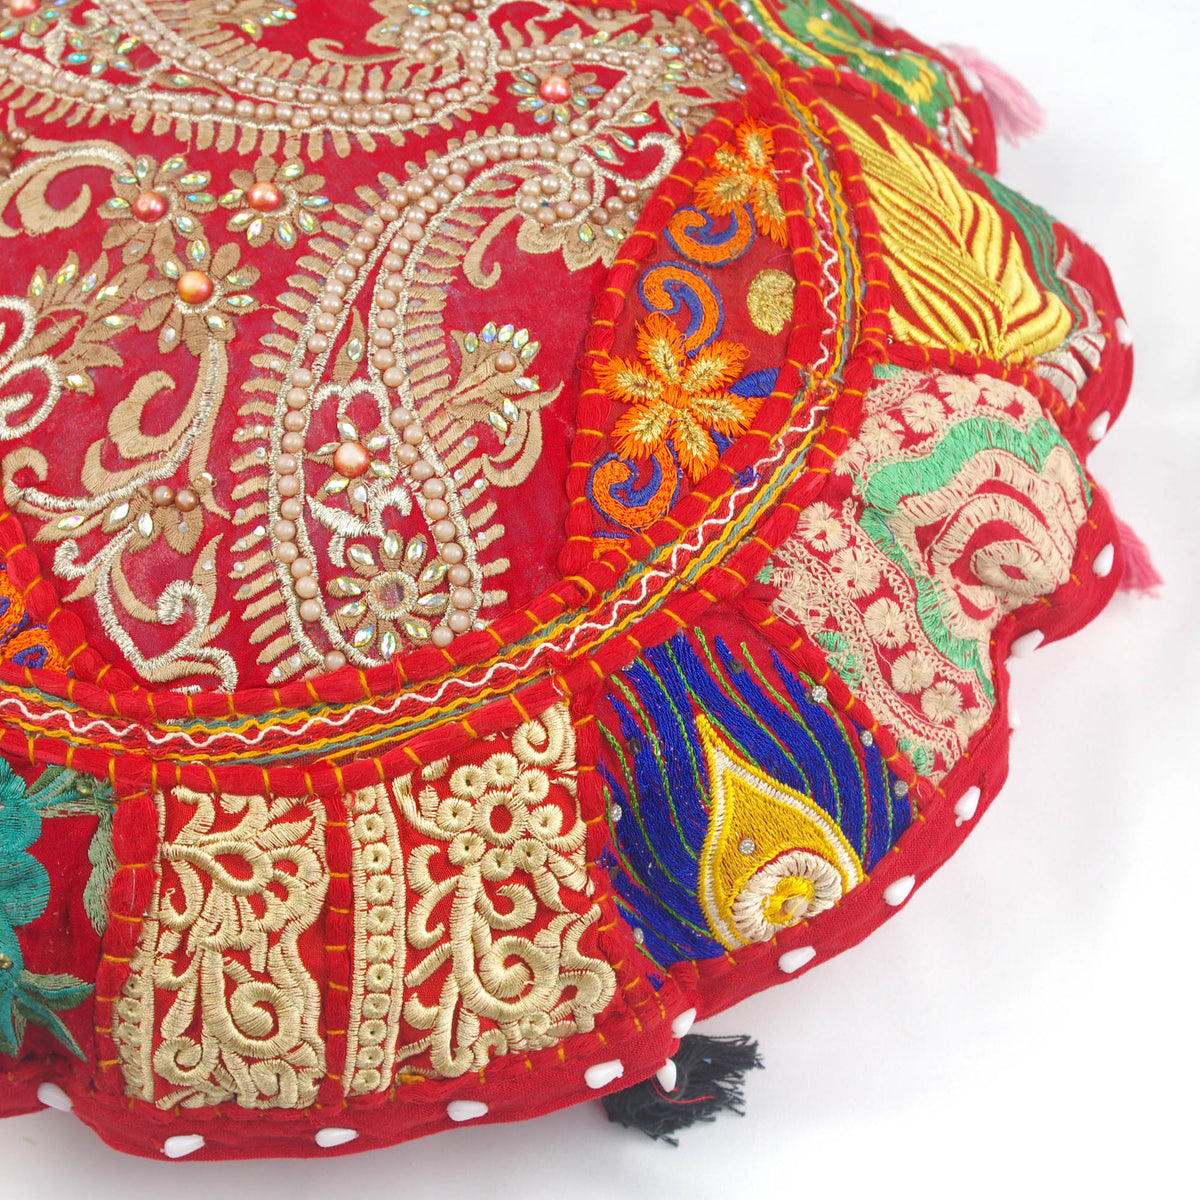 Red Beaded Paisley Round Floor Embroidered Patchwork Pouf Ottoman Indian Vintage Cushion Cover 18"